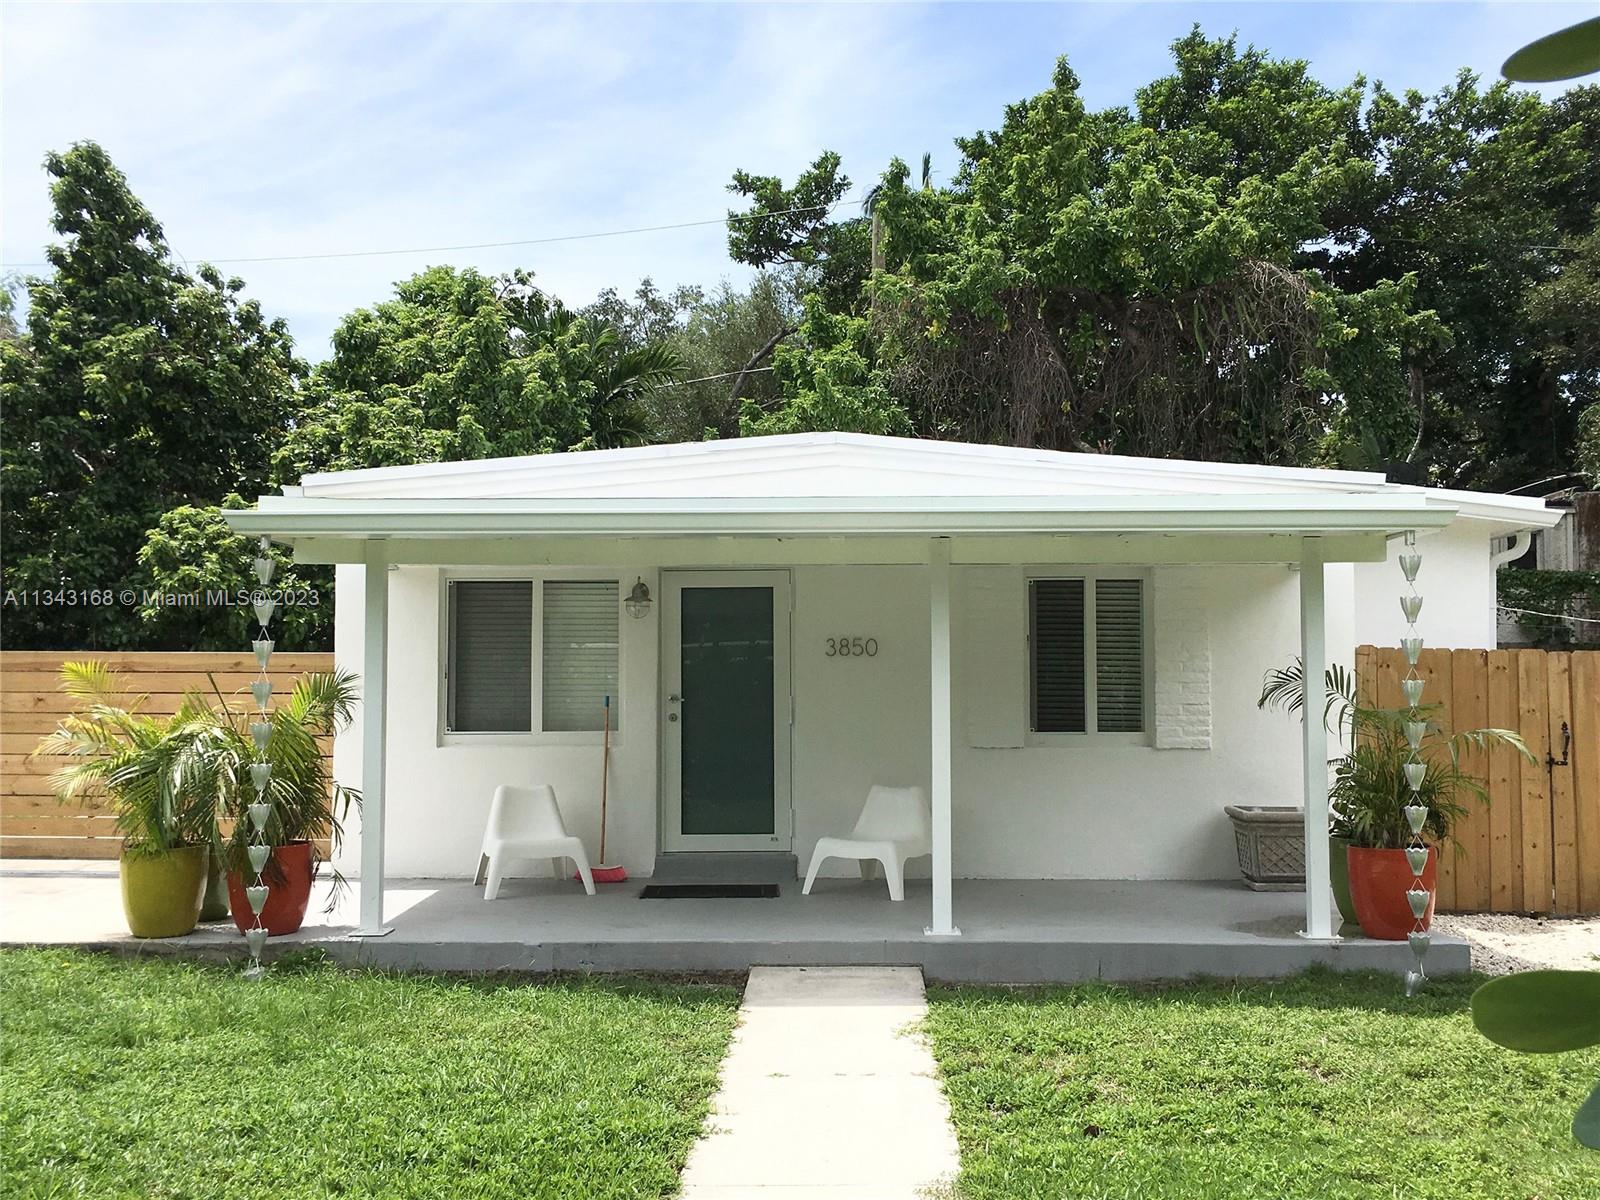 Are you looking for a completely renovated home under $800,000 in Coconut Grove for yourself or as a highly profitable investment property? Move right in to this three bedroom, two bath home on a 6,000 SF lot or earn great income with potential to build a multi-million dollar home now or in the future. Located just a mile from all the top shops, restaurants, entertainment, and waterfront parks in Coconut Grove’s village center, within walking distance to two top public schools, less than a mile to the Metrorail (one stop to UM), and just 5 miles from Brickell/Downtown Miami.